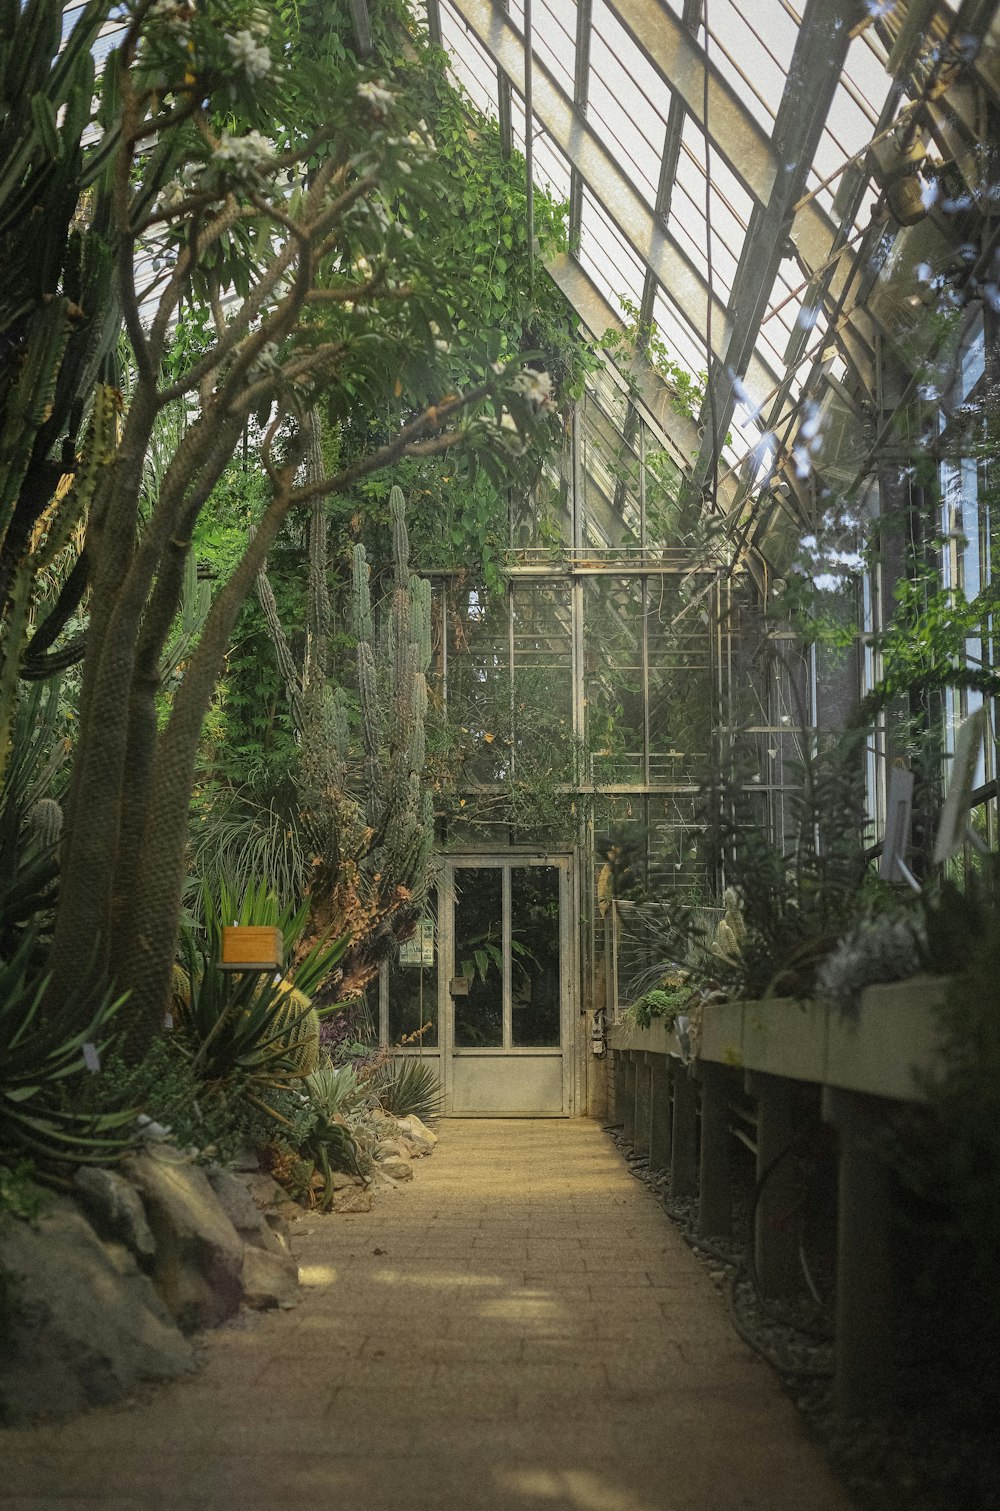 a walkway in a greenhouse with lots of plants